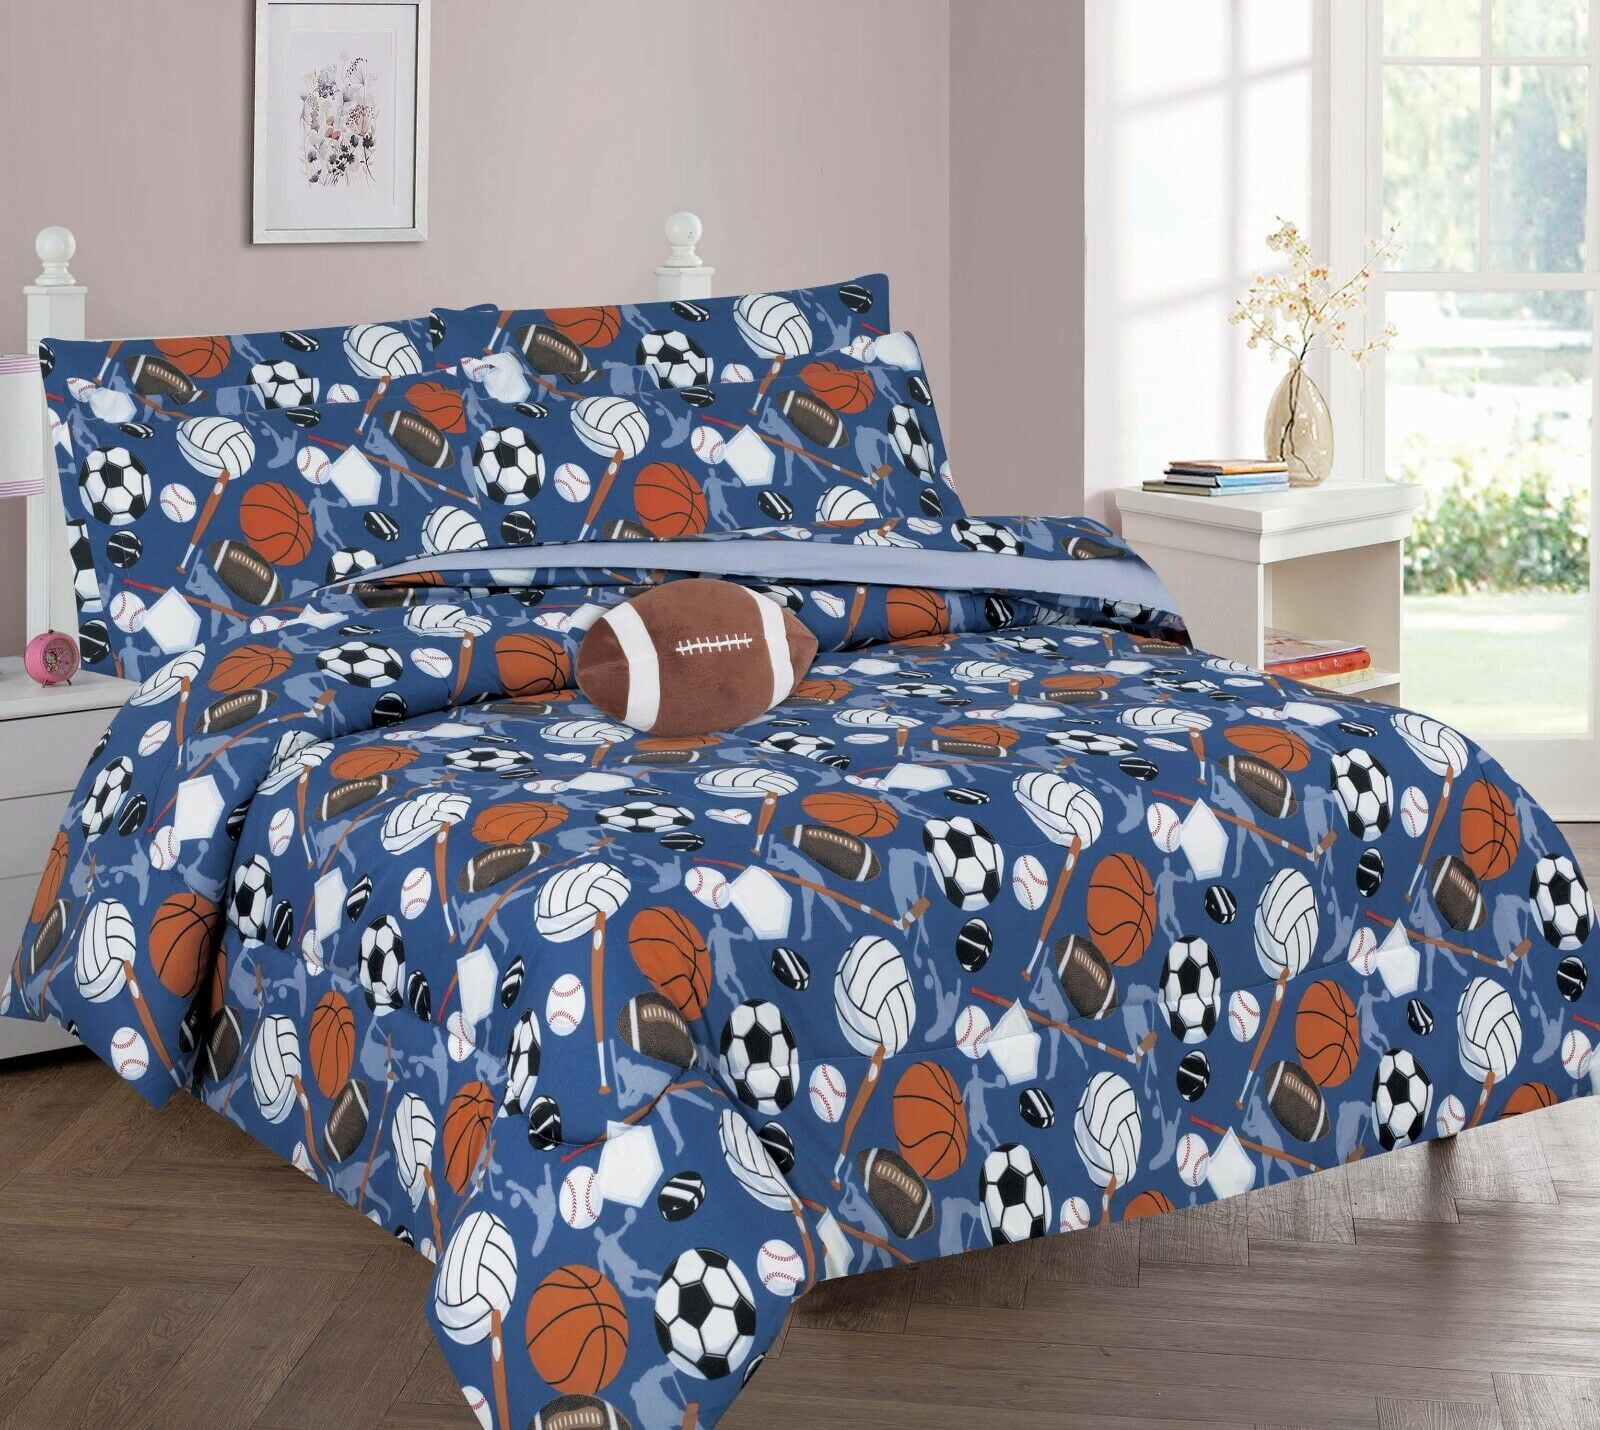 Soft Decorative Fabric Bedding All-Round Elastic Pocket Twin Size Hockey Players Hobby Activity Themed Athletes Game Win Champion Olympics Illustration Blue Red Lunarable Sport Fitted Sheet 